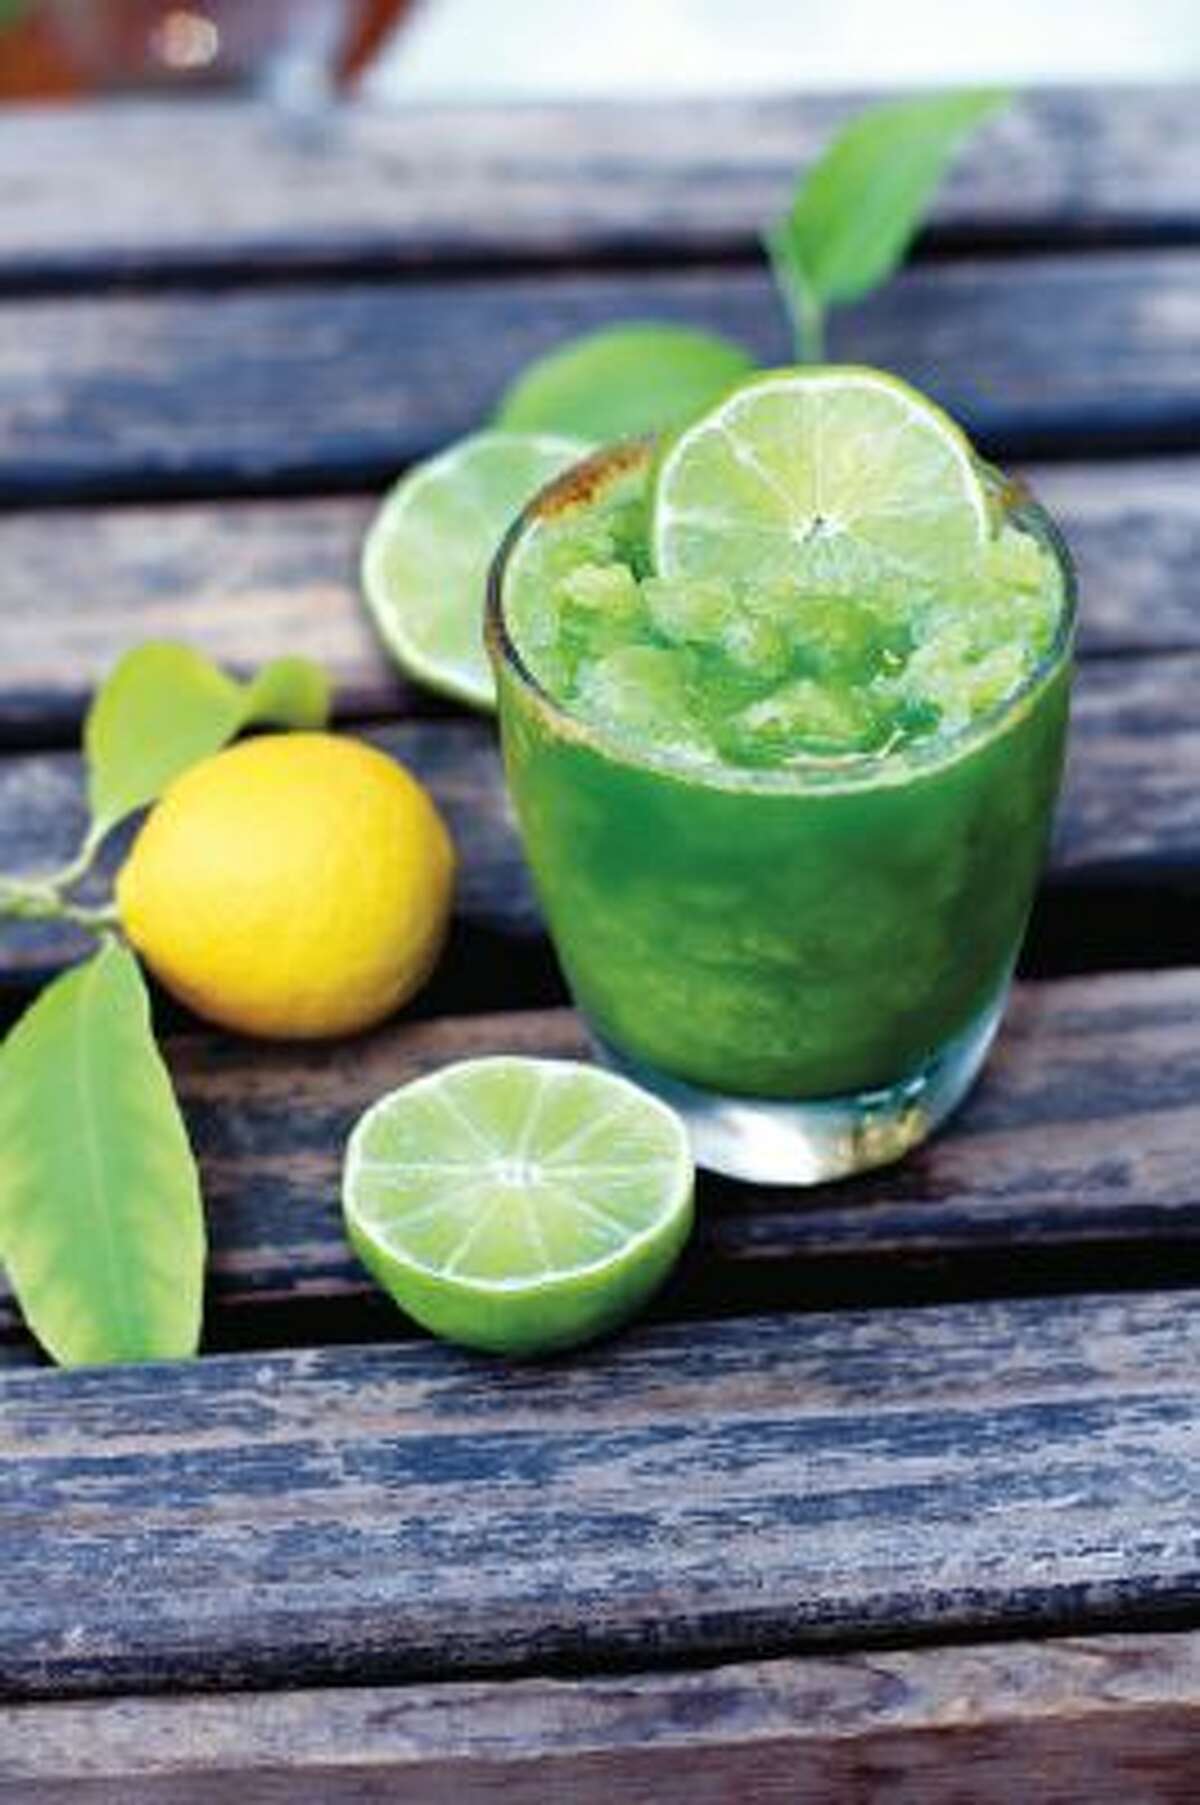 A lemon-lime smoothie boosts your immune system and wakes up those tastebuds.